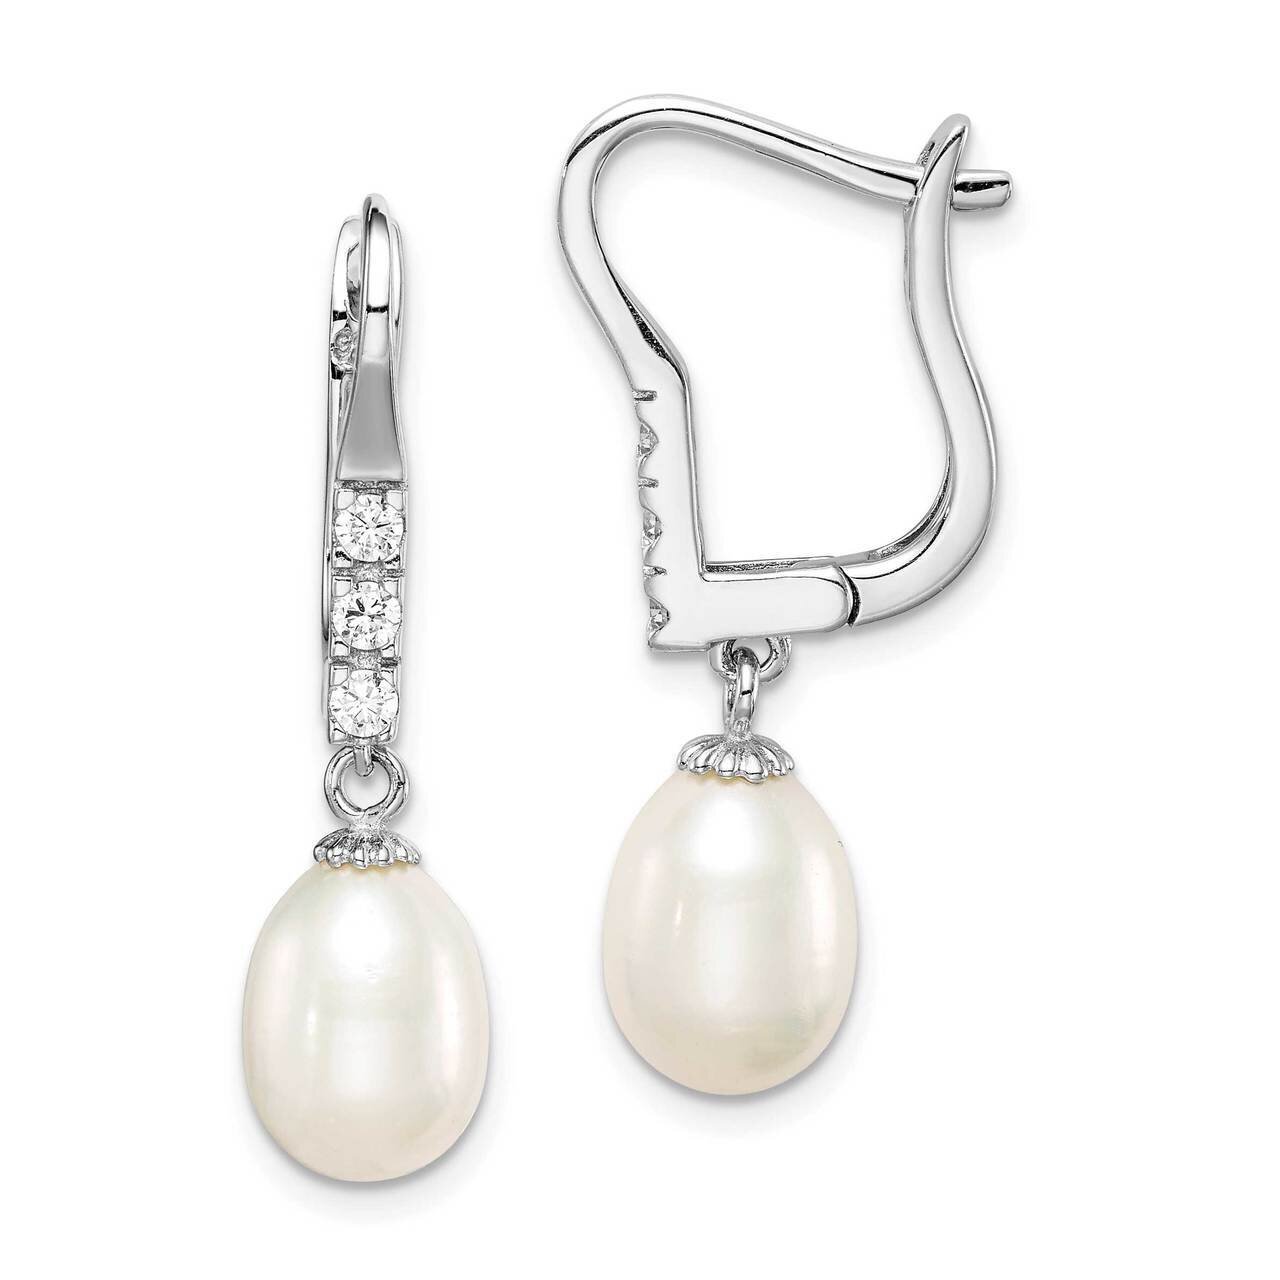 7-8mm White Rice Freshwater Cultured Pearl CZ Diamond Leverback Earrings Sterling Silver Rhodium Plated QE15416